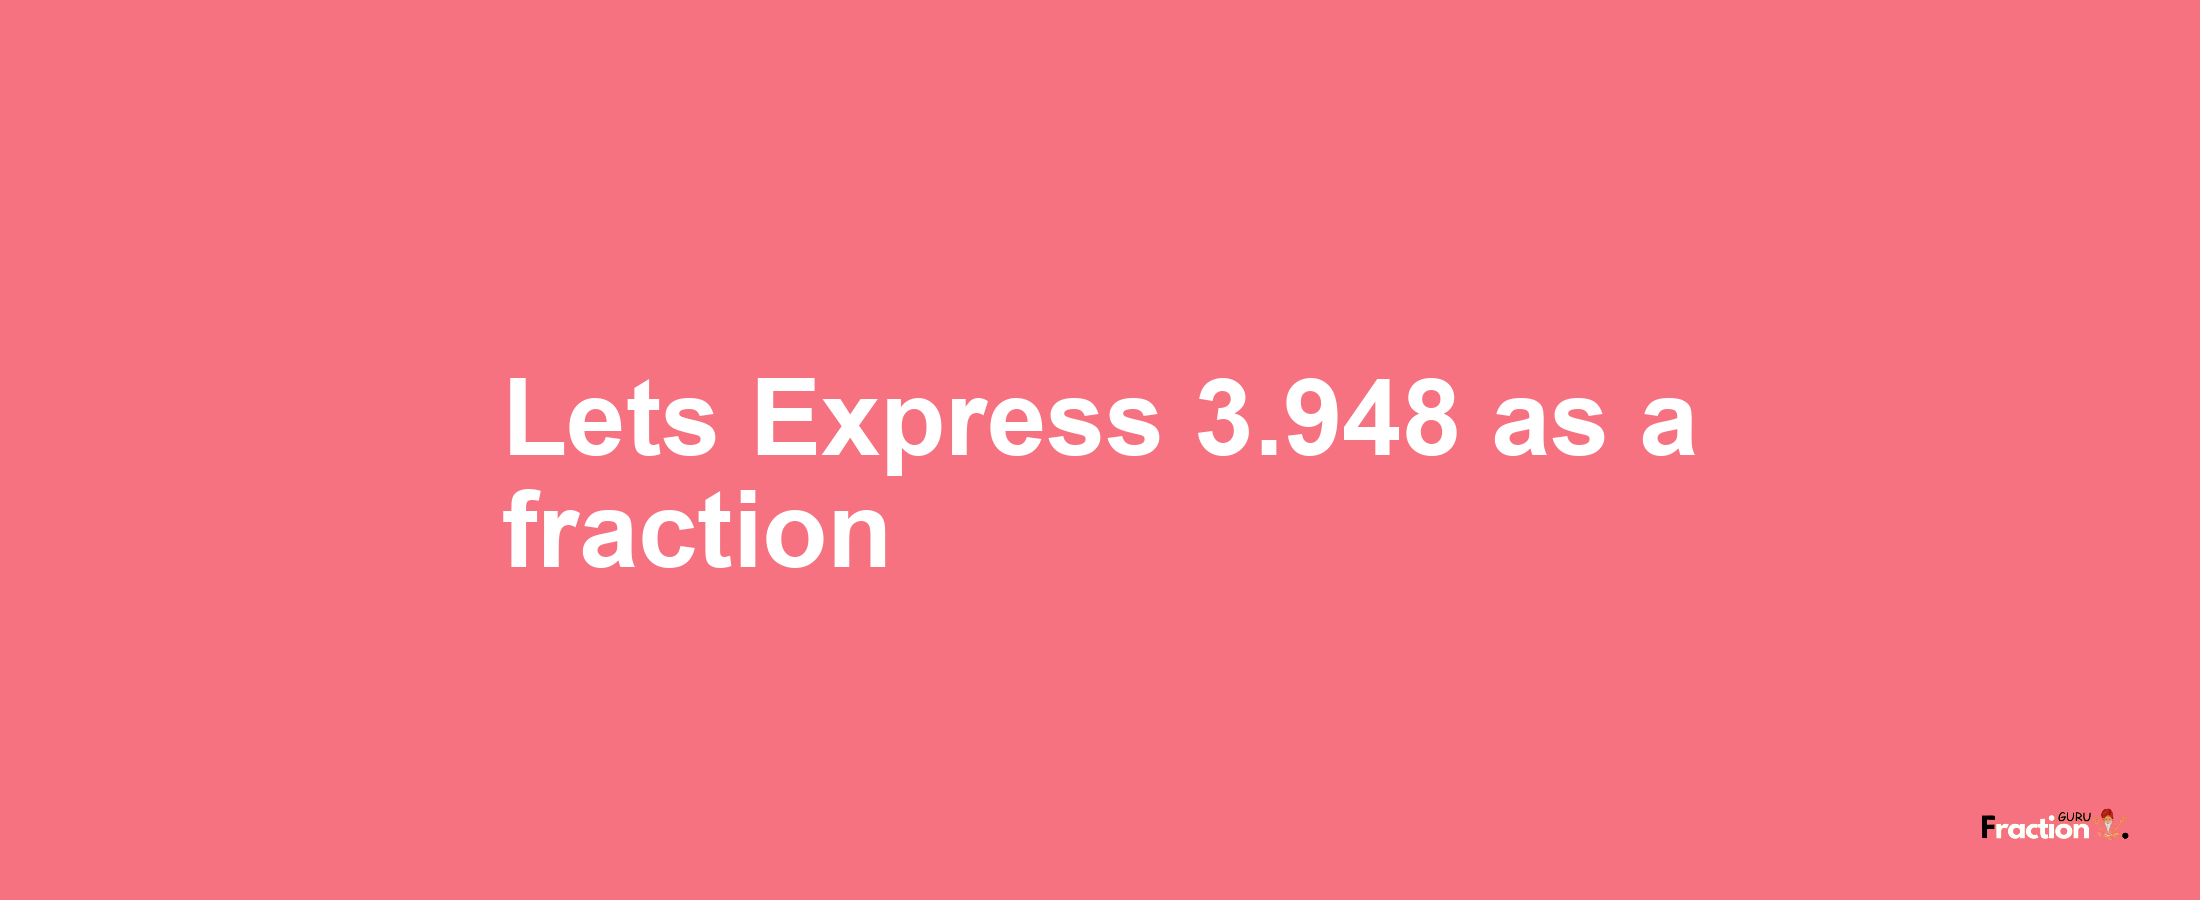 Lets Express 3.948 as afraction